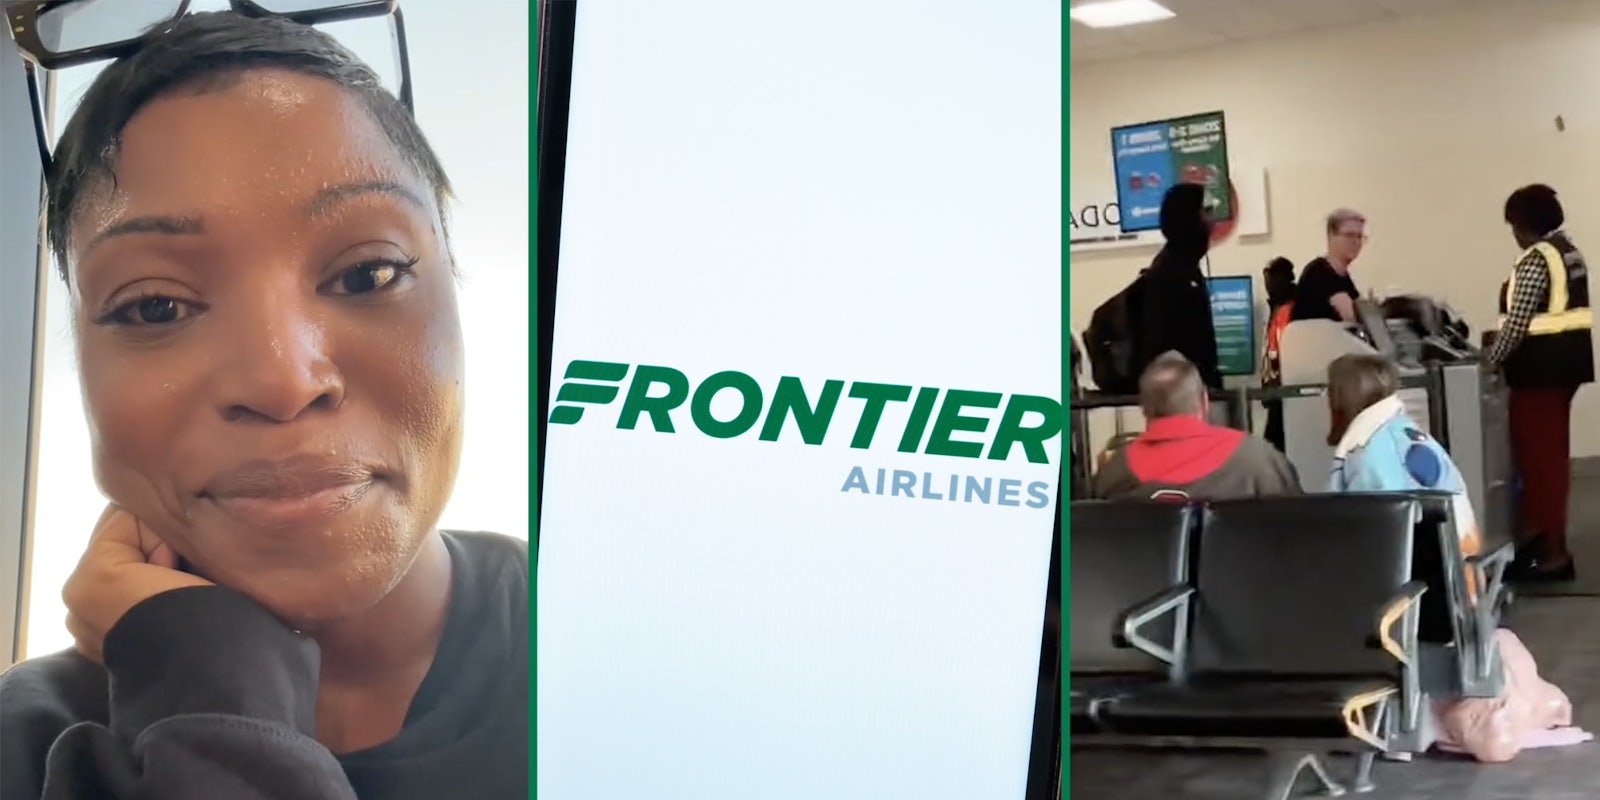 Woman sweating(l), Frontier Airlines app(c), People waiting at gate(r)